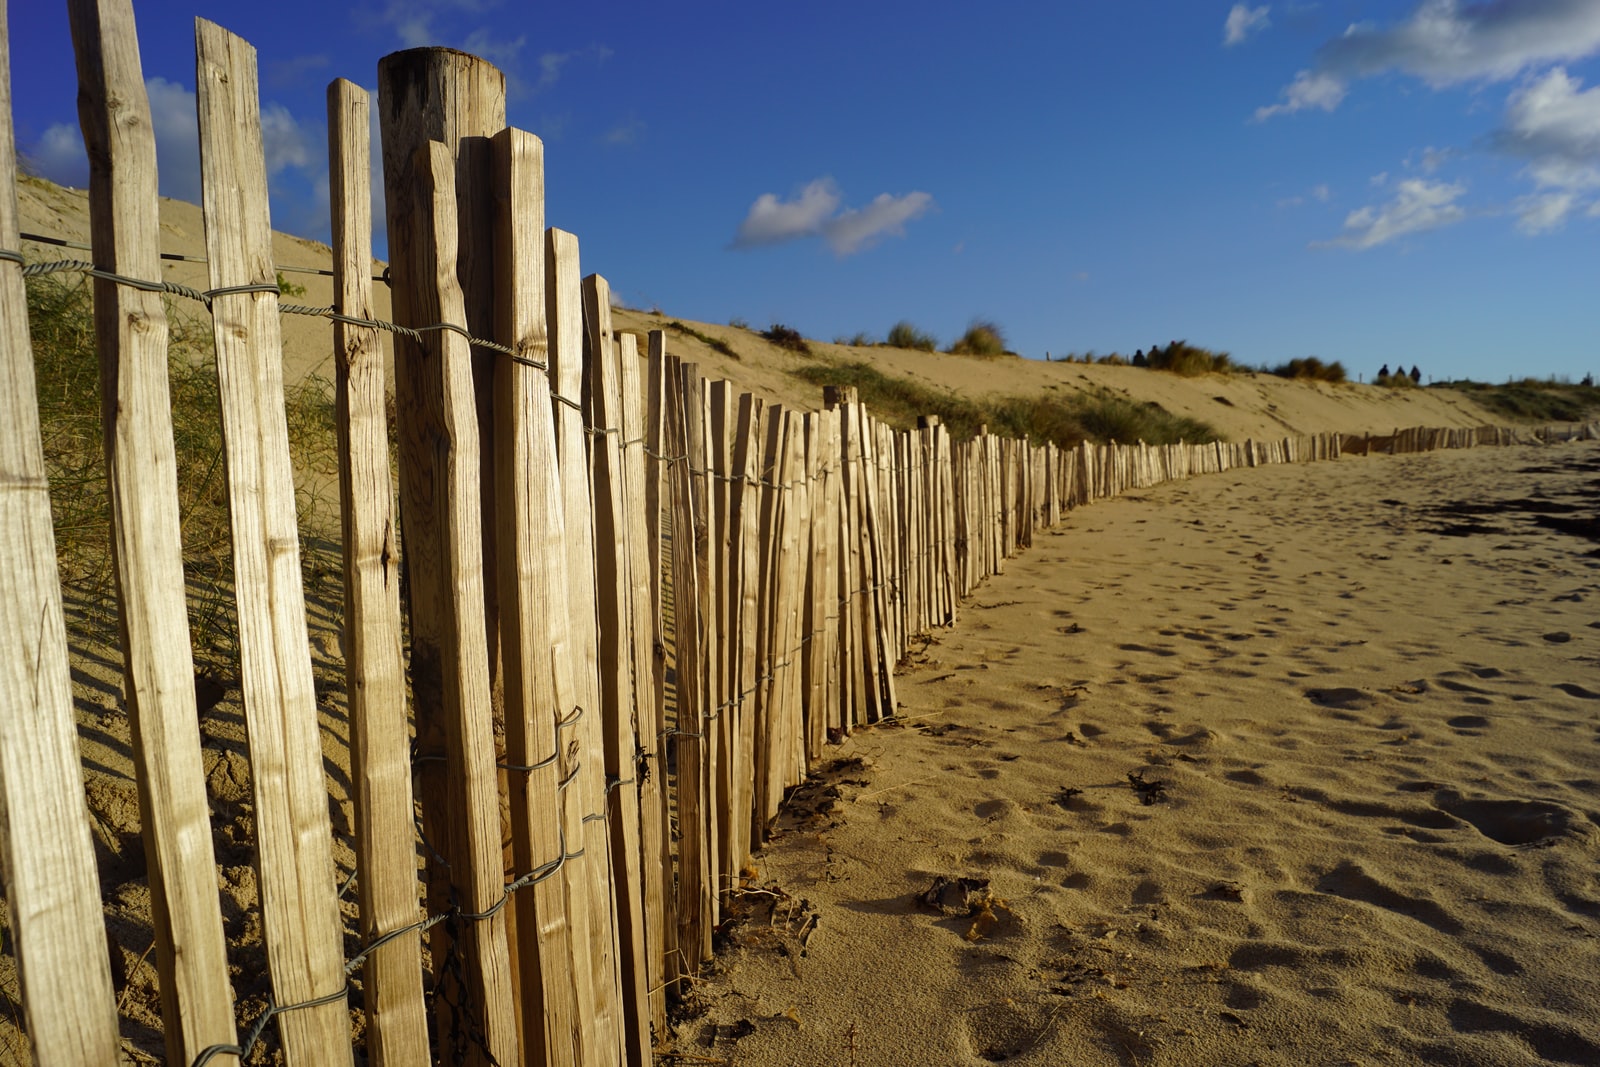 brown wooden fence on brown sand under blue sky during daytime